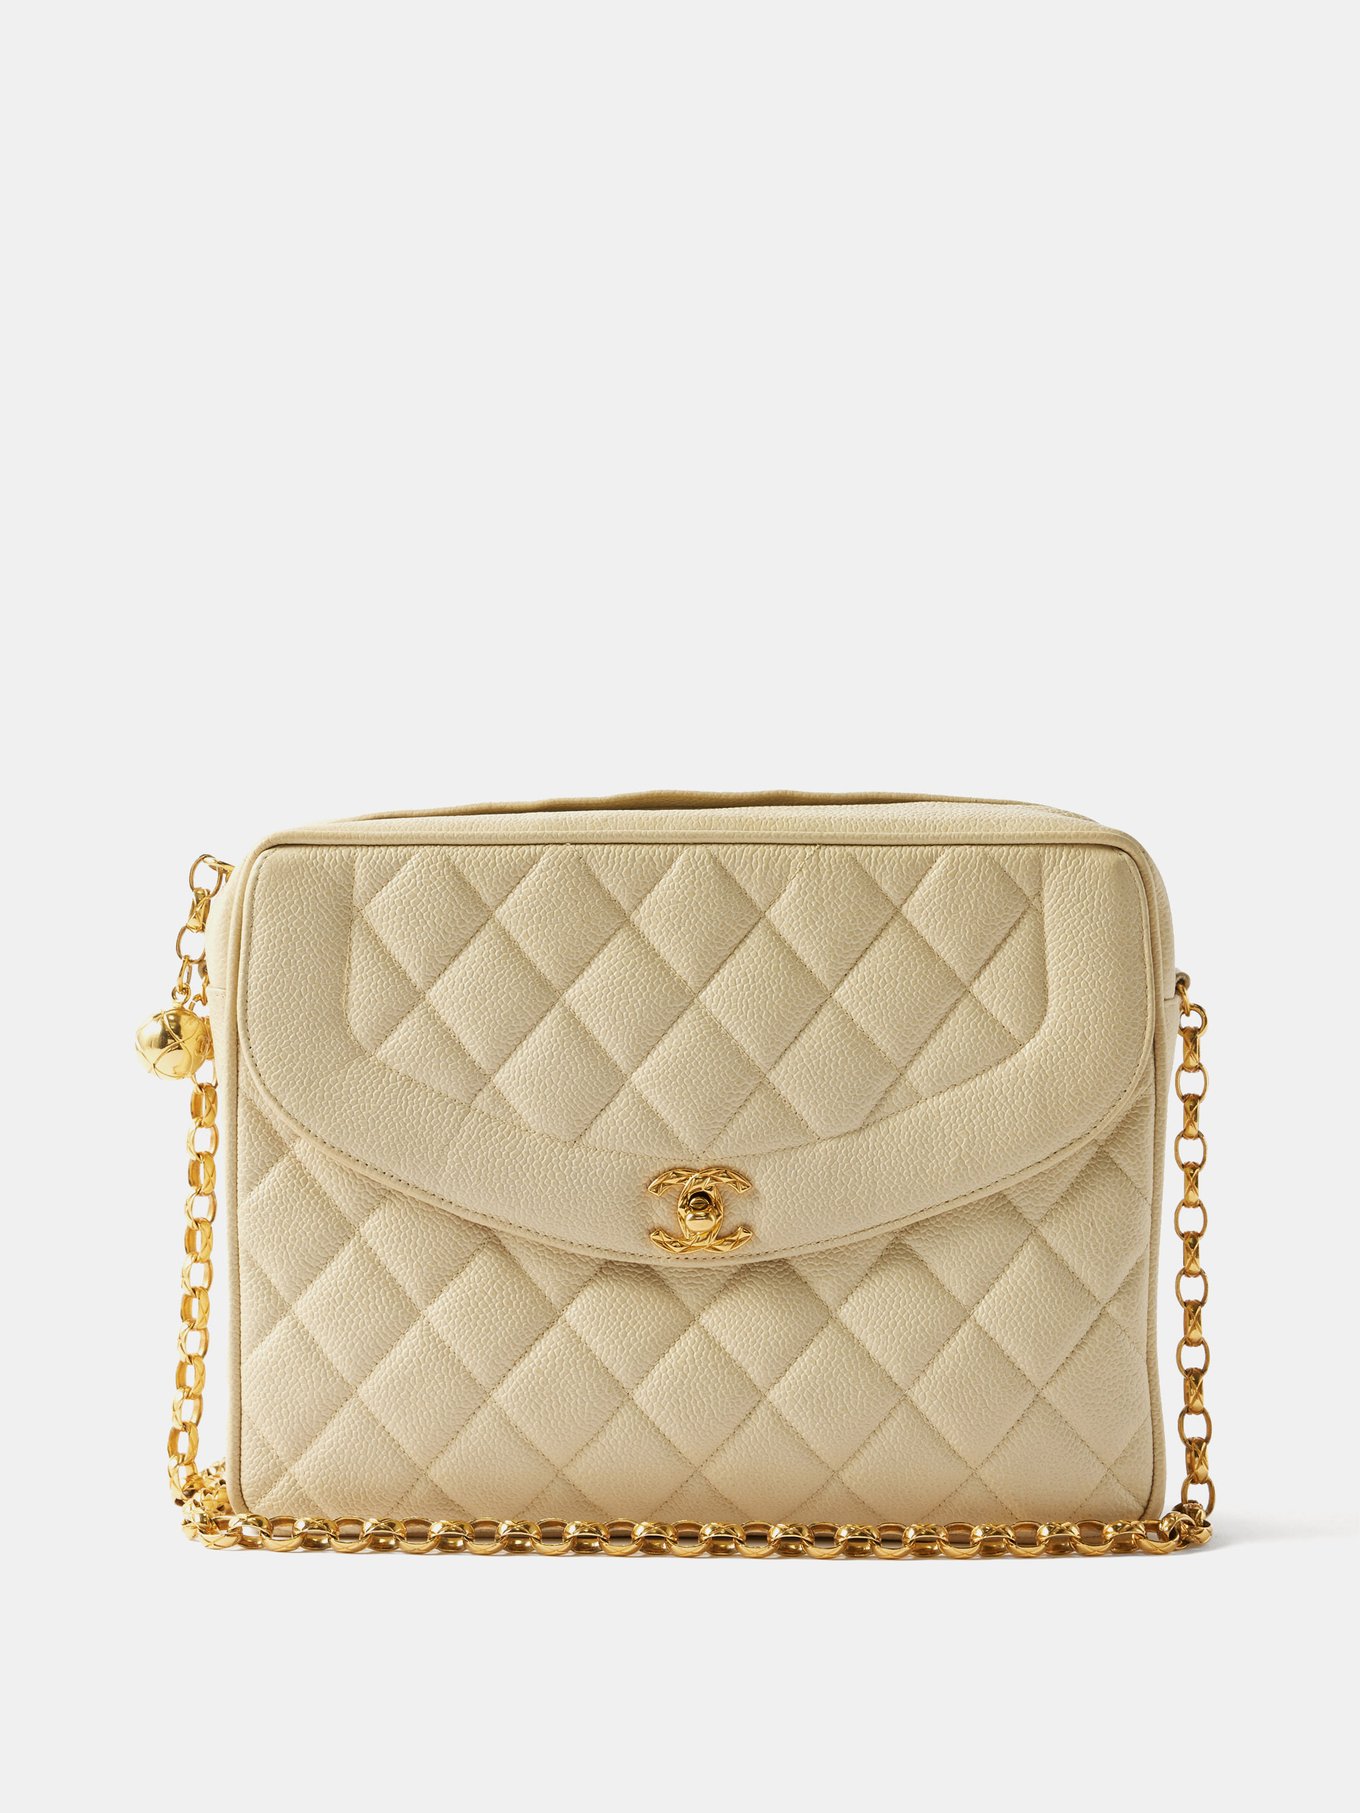 Chanel 1990s Cream Quilted Leather Camera Crossbody Bag 